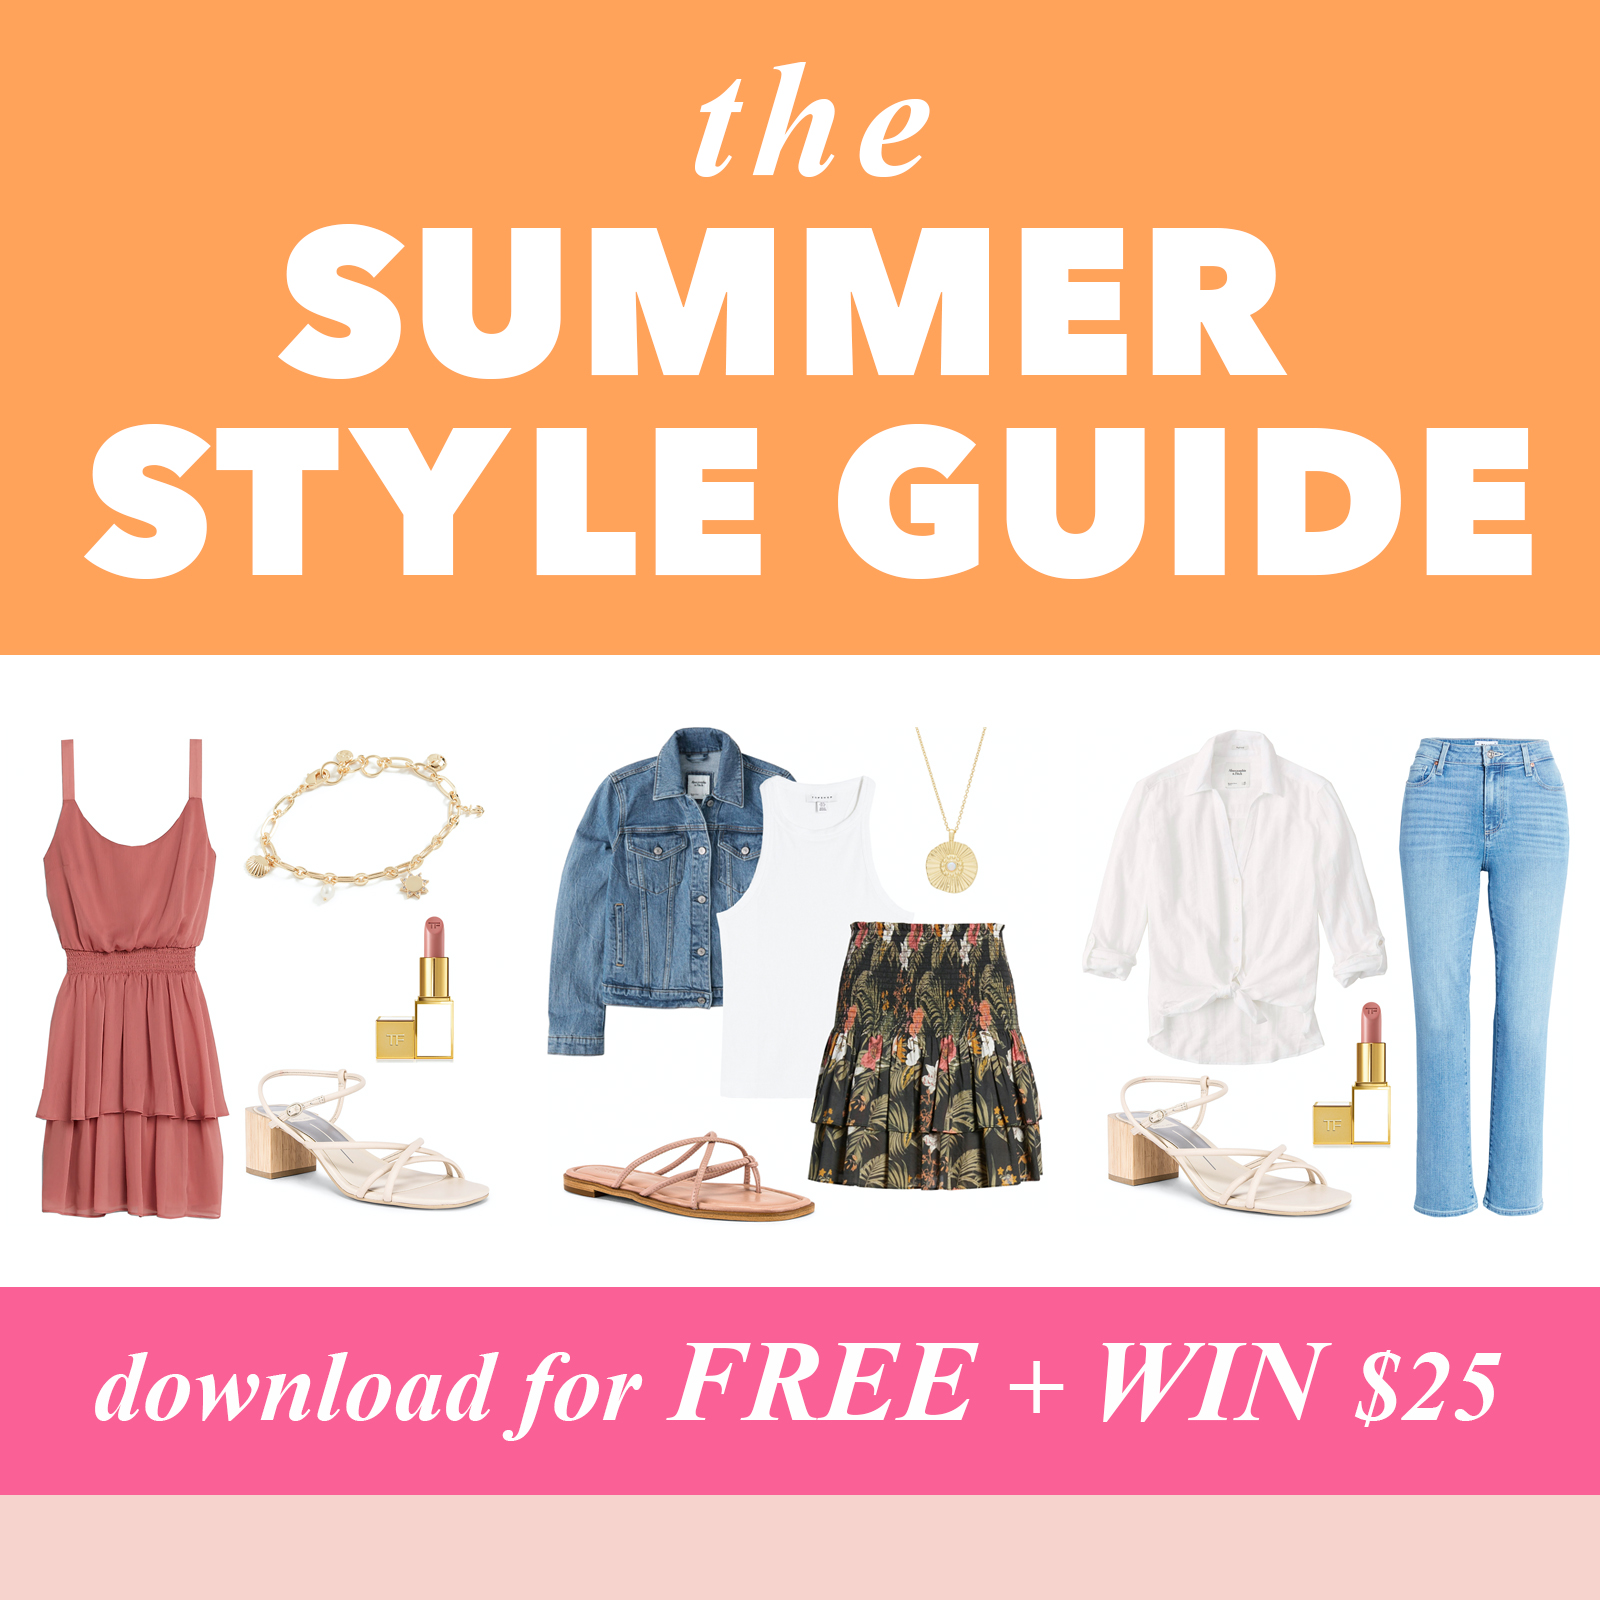 Daily Style Finds: Announcing My New Style Guide Book + Win $25 Gift Card